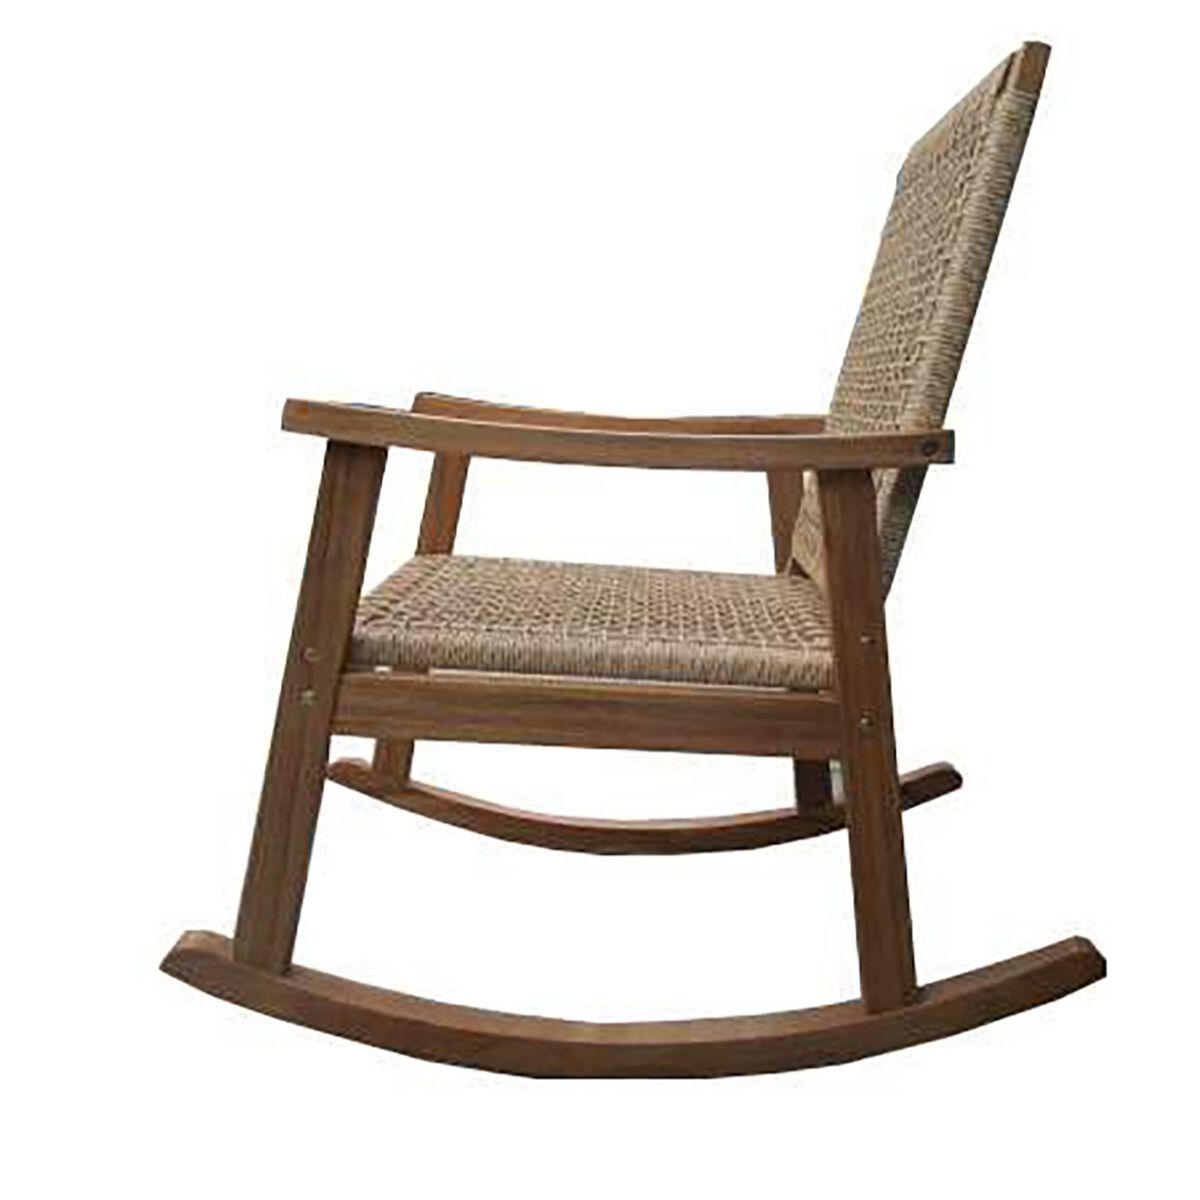 Outdoor Living and Style 38.75" Brown Eurochord Outdoor Patio Rocking Chair